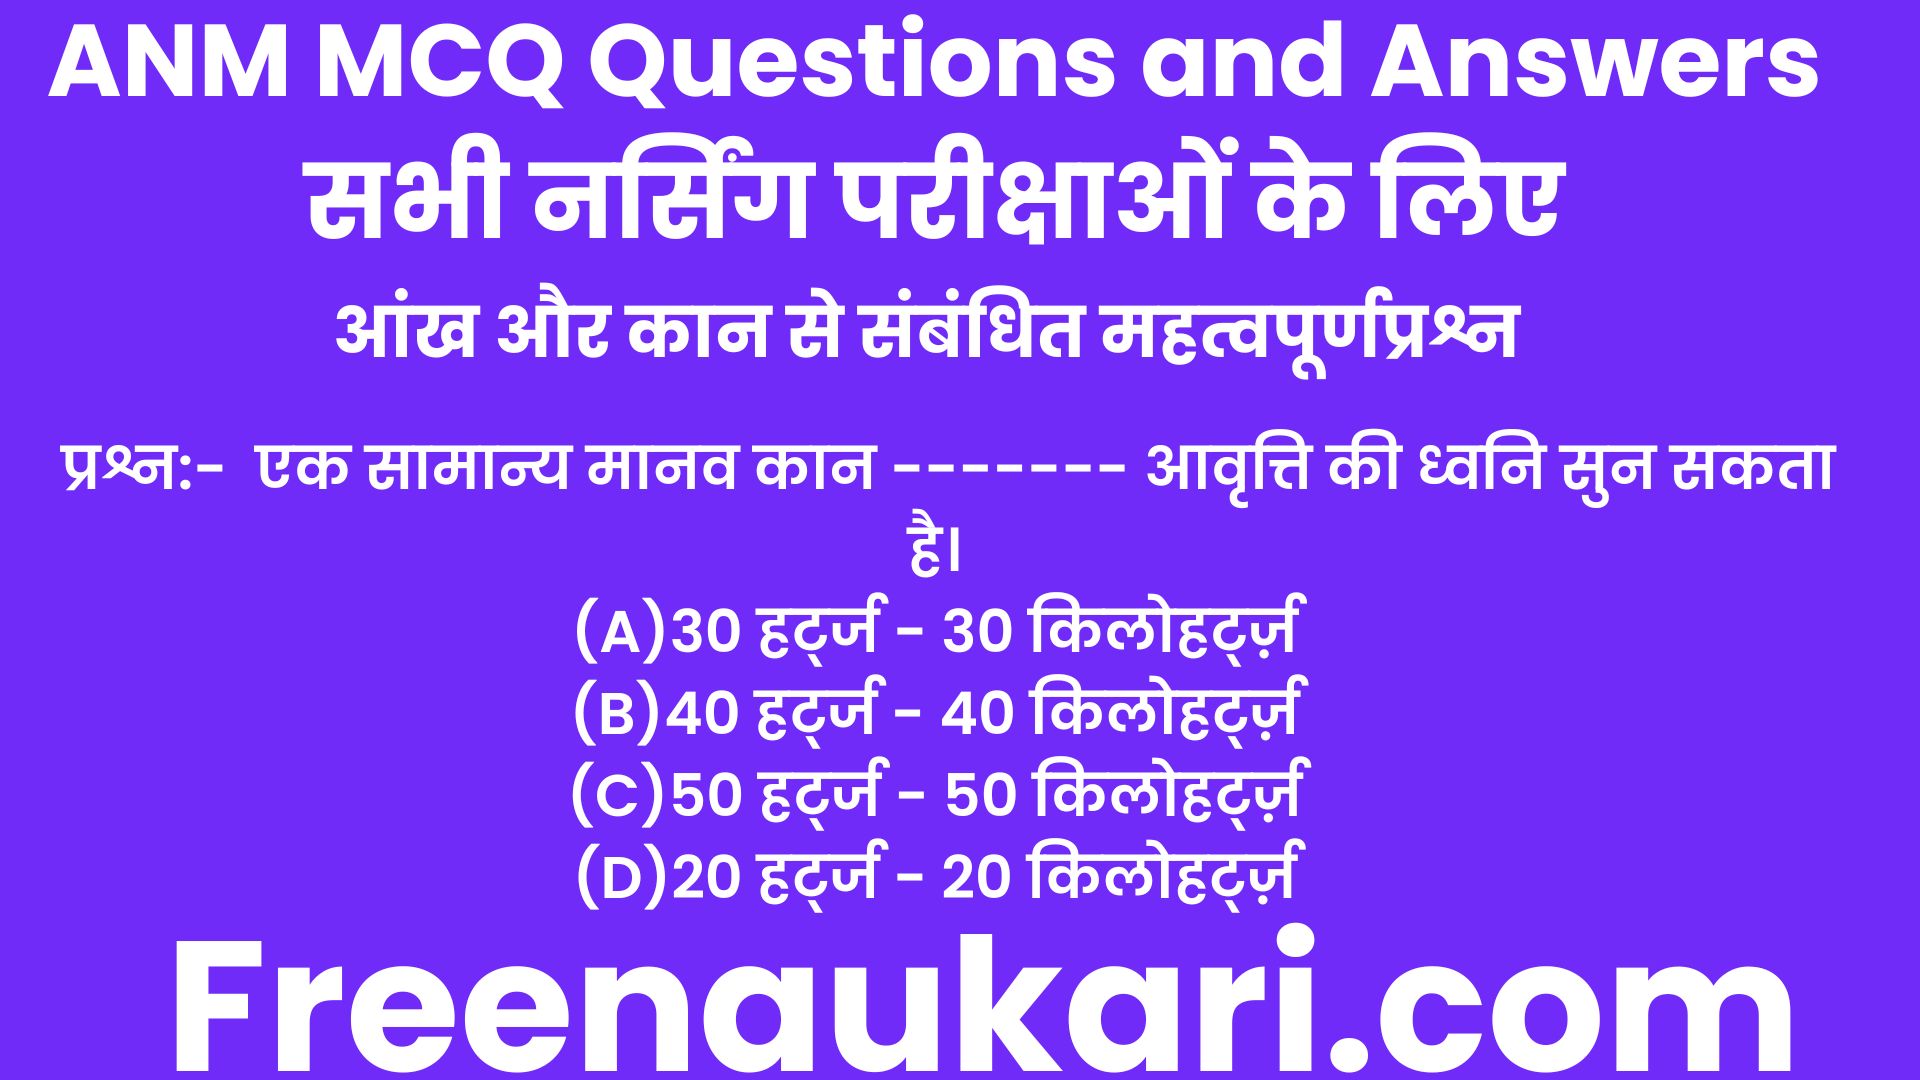 ANM MCQ Questions and Answers pdf